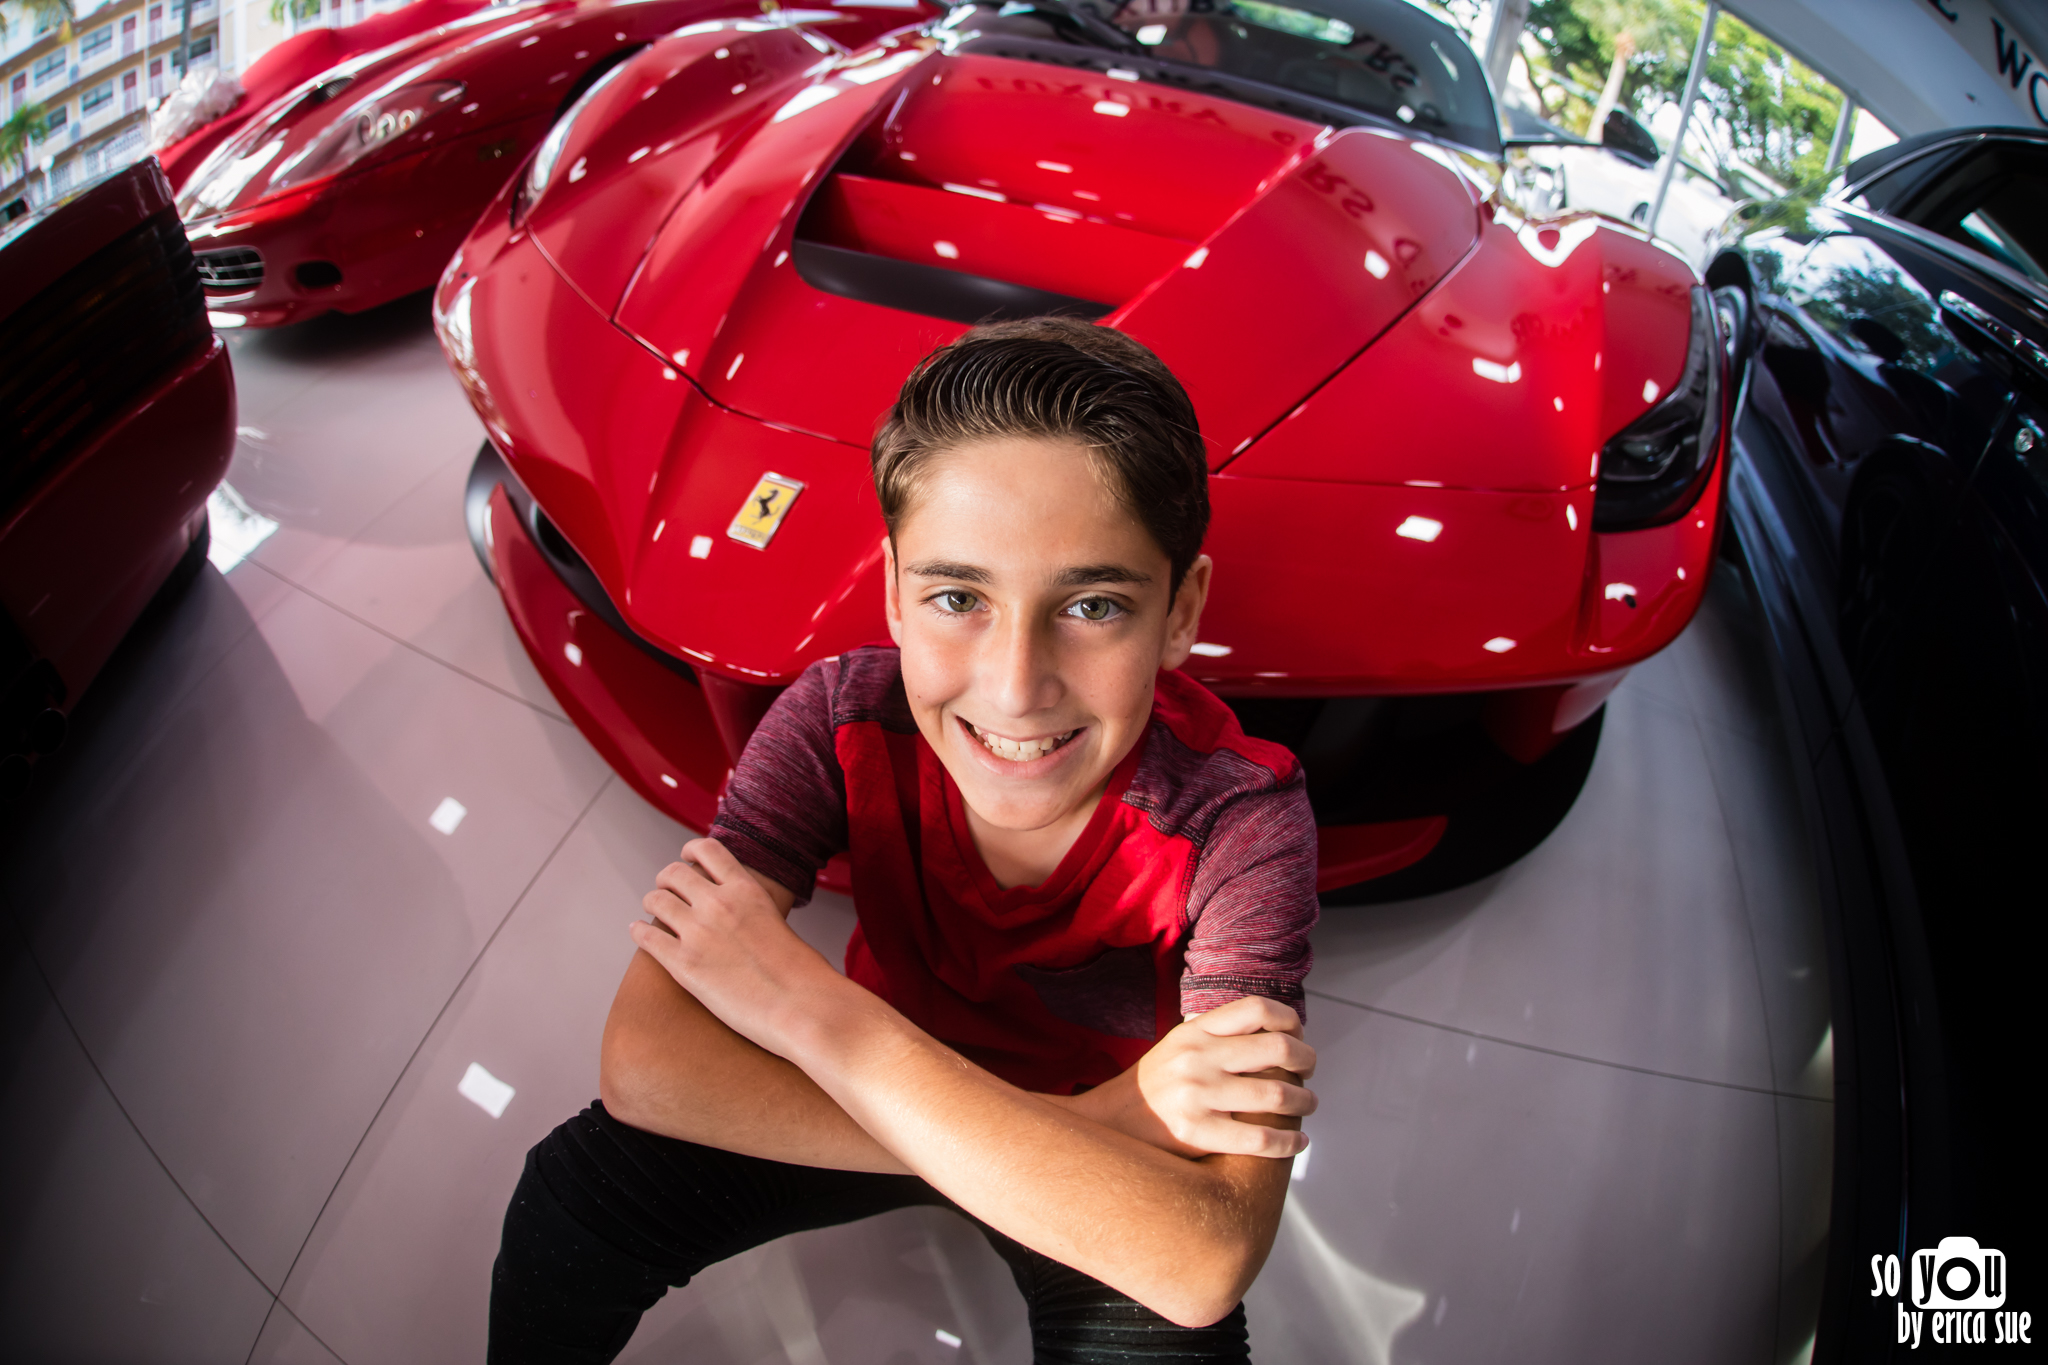 so-you-by-erica-sue-mitzvah-photographer-collection-luxury-car-ft-lauderdale-4902.jpg